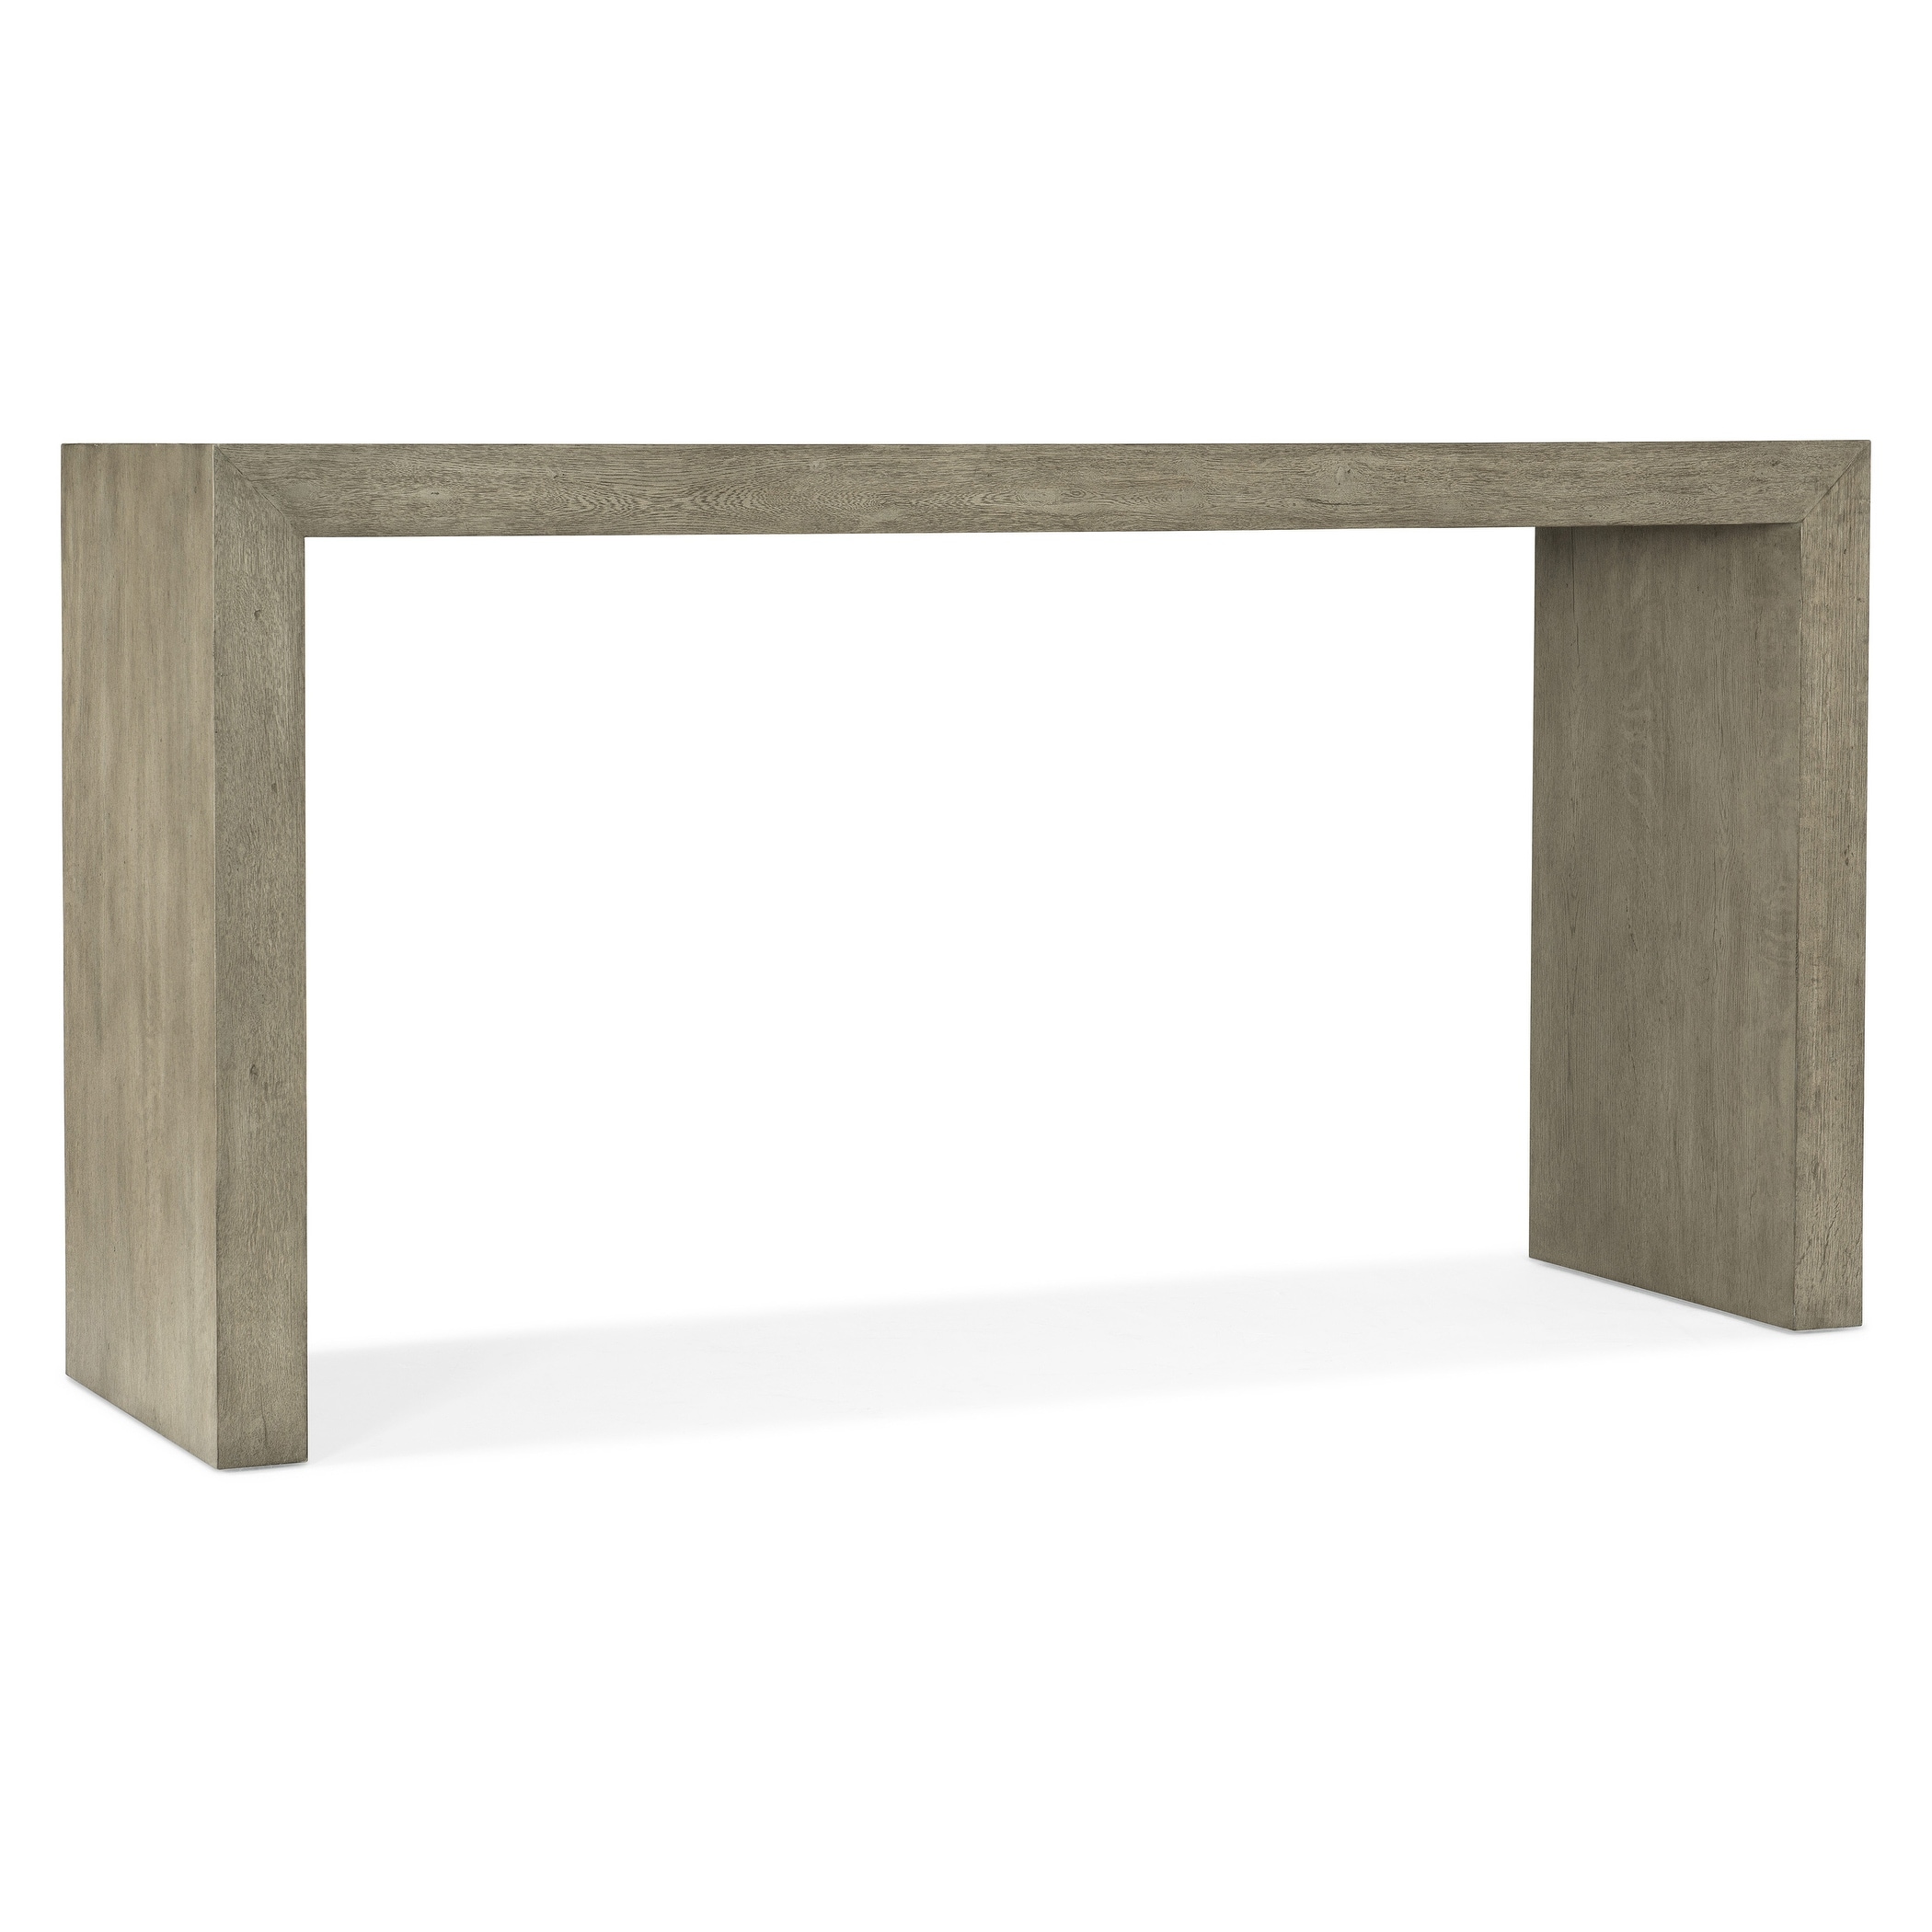 Linville Falls Chimney View Console Table - 67.5 inchW x 35.5 inchH x 20 inchD